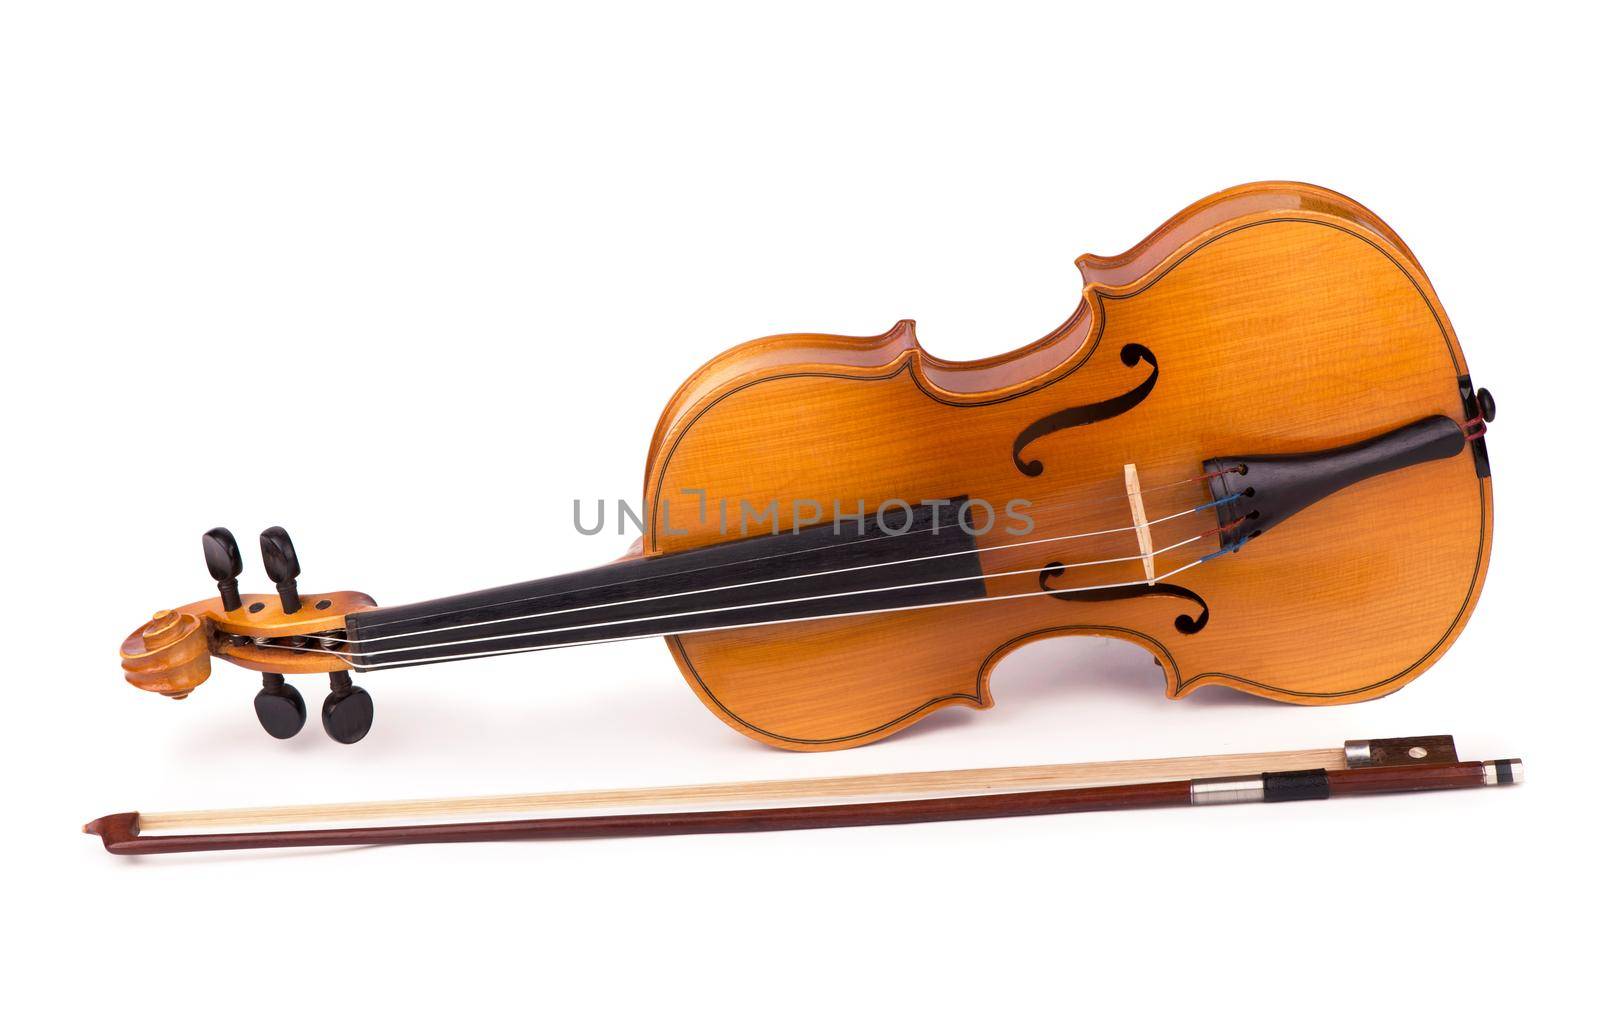 Violin and bow on the white background by aprilphoto